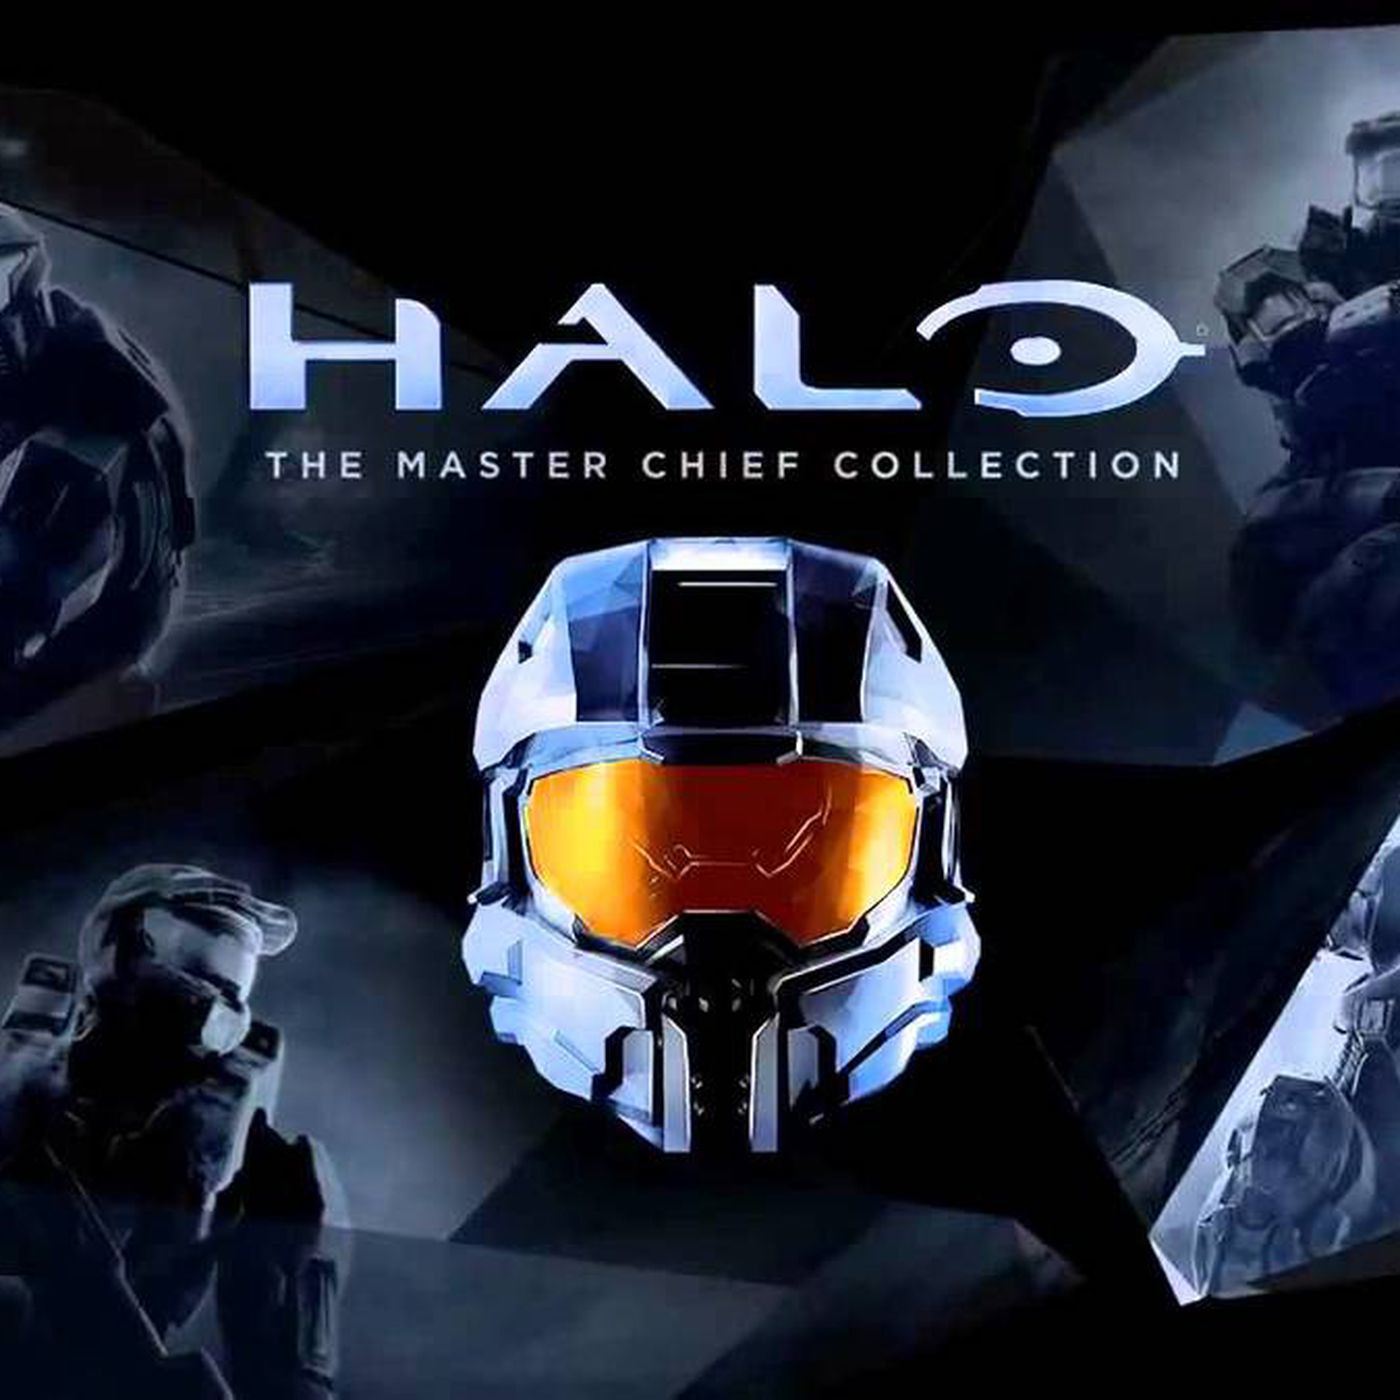 Master chief collection pc release date 2019